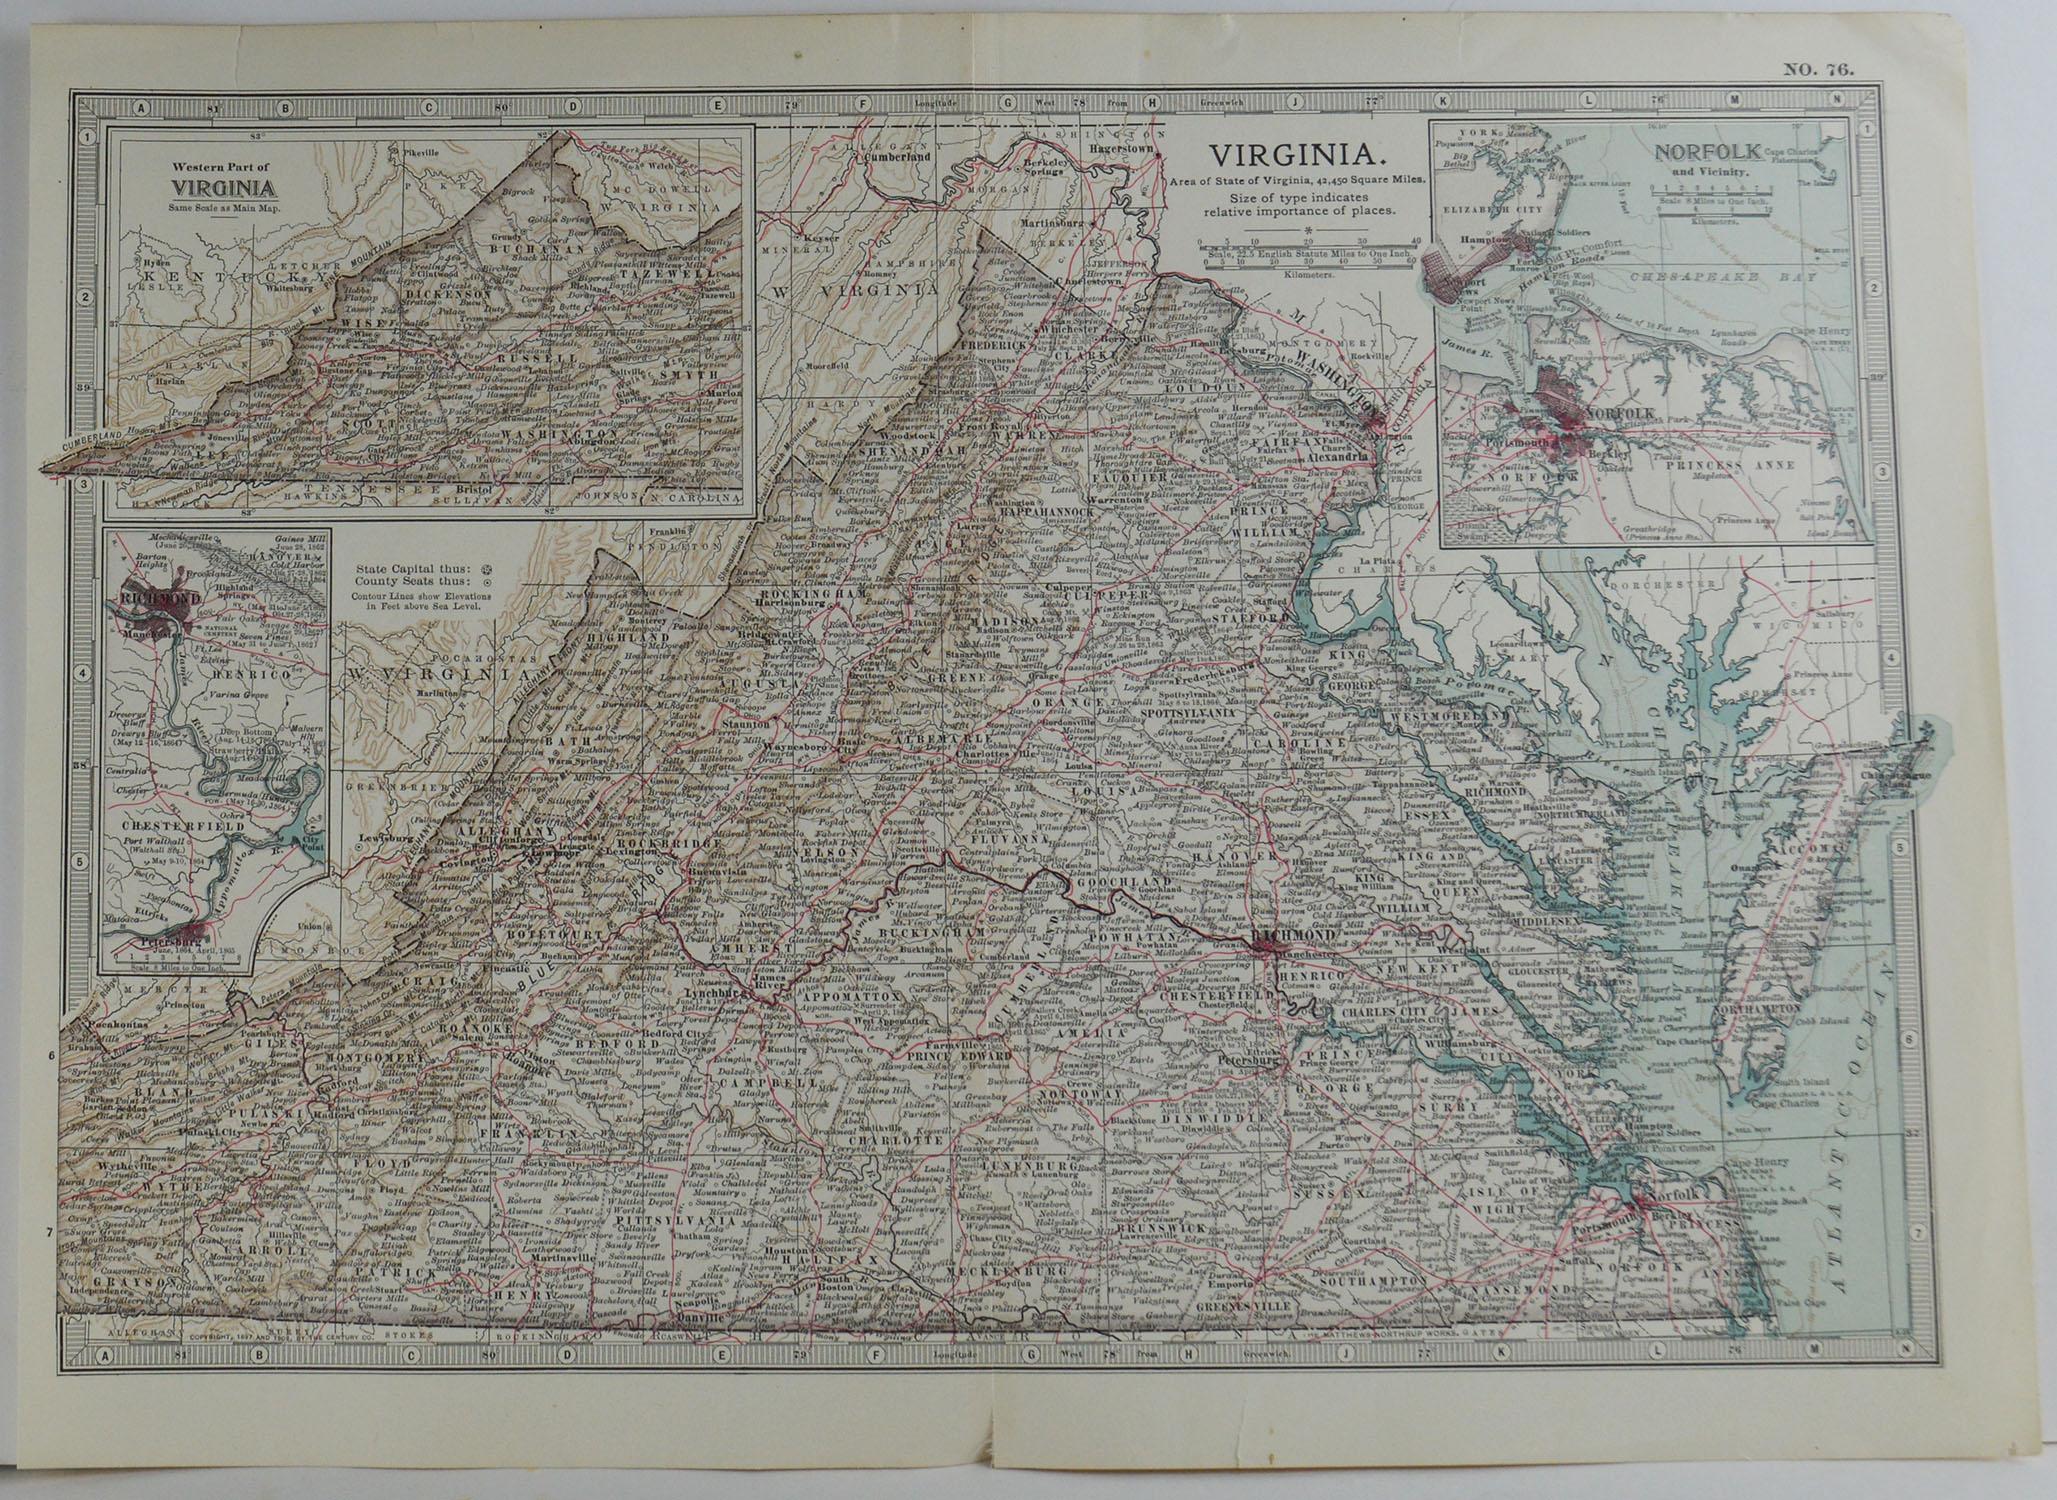 Great map of Virginia

Original color.

Published circa 1890

Repairs to minor edge tears

Unframed.
 